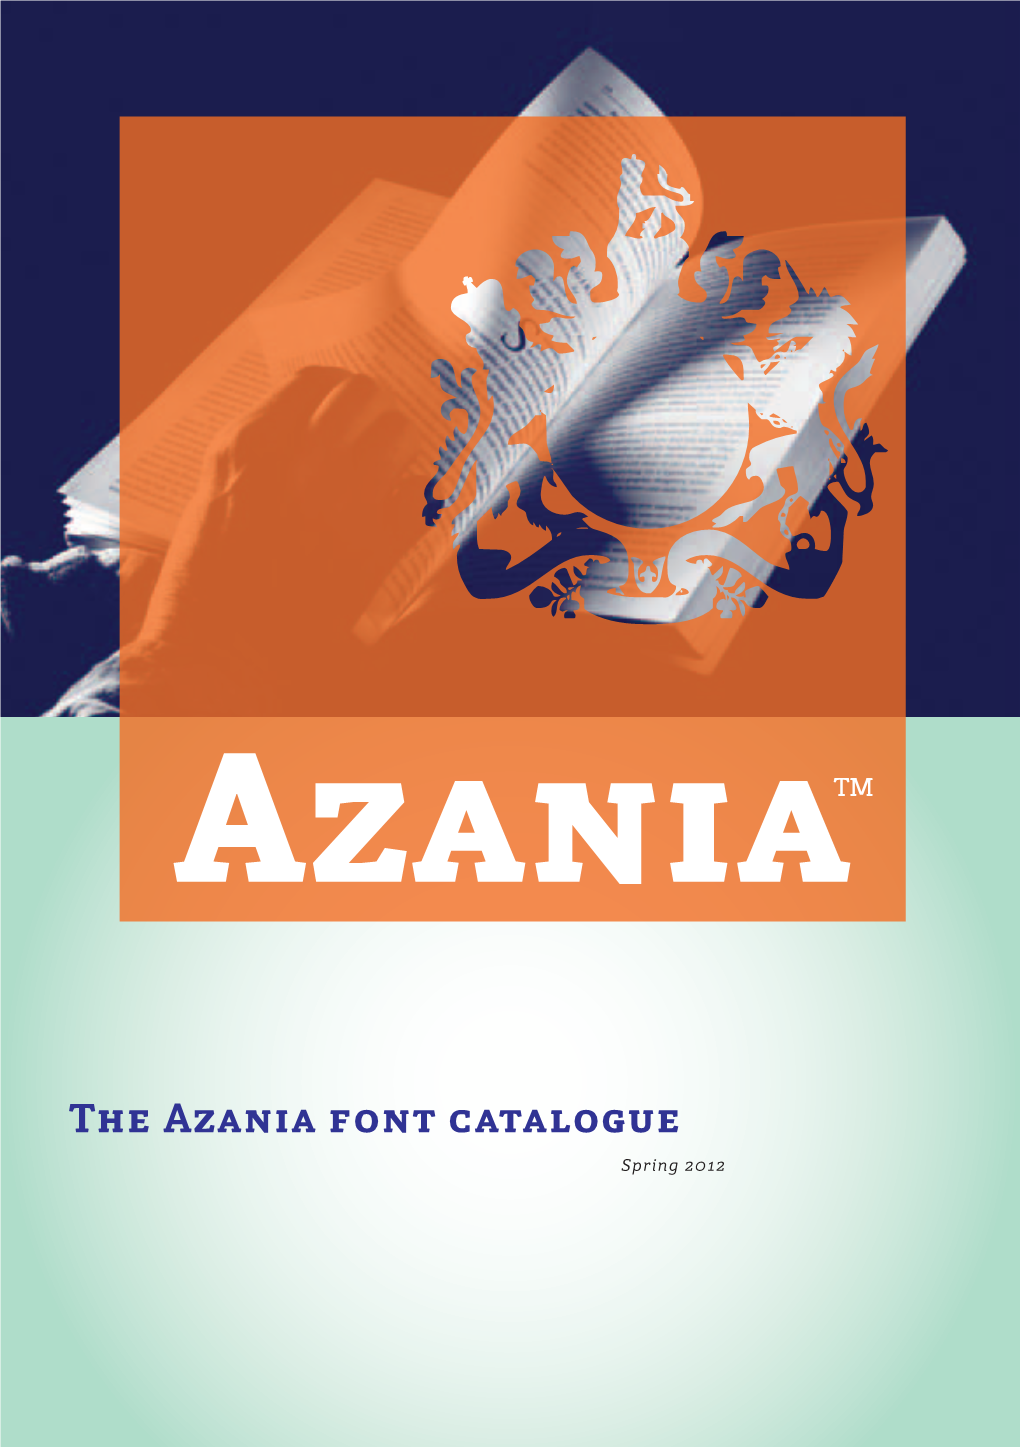 The Azania Font Catalogue Spring 2012 Once Upon a Time There Was a Place Azania™ Called Azania